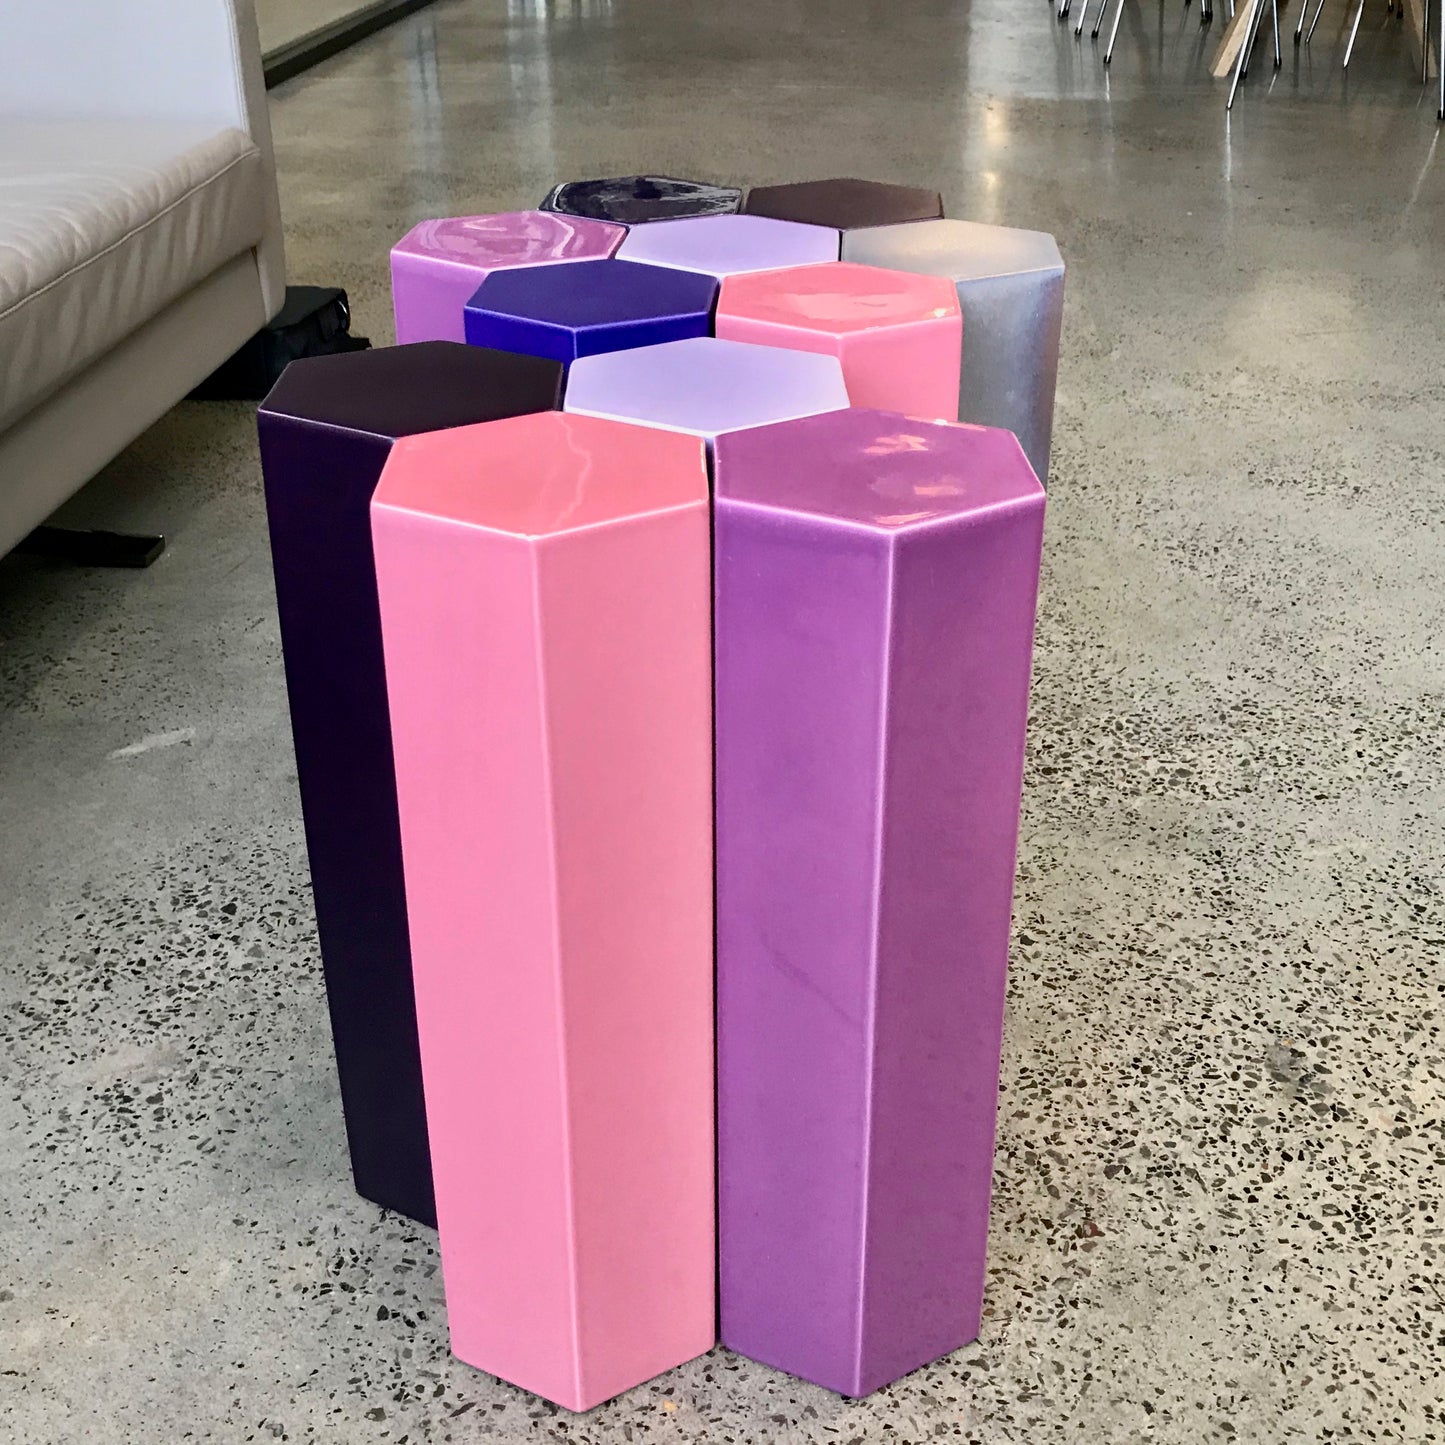 MUC4 Side Tables by Christophe Delcourt through Ondene (minor damage)